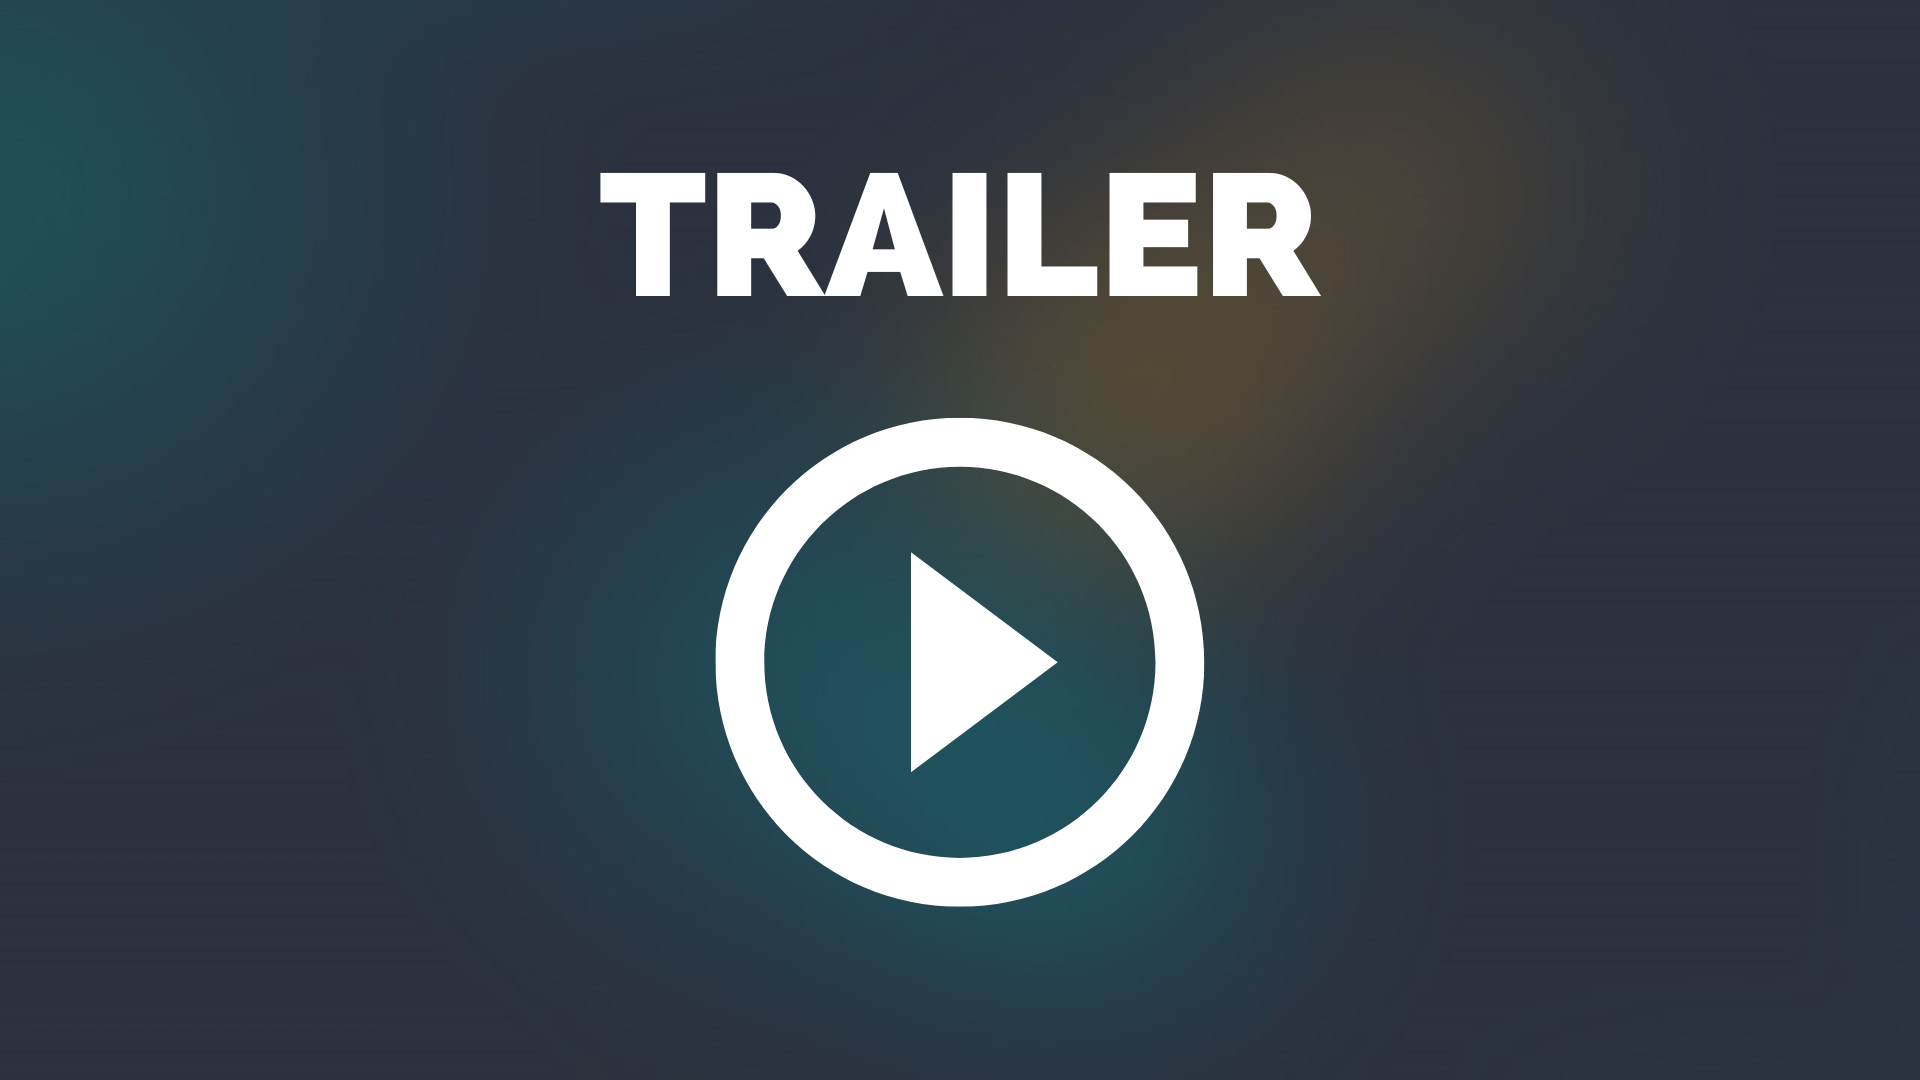 Product trailer